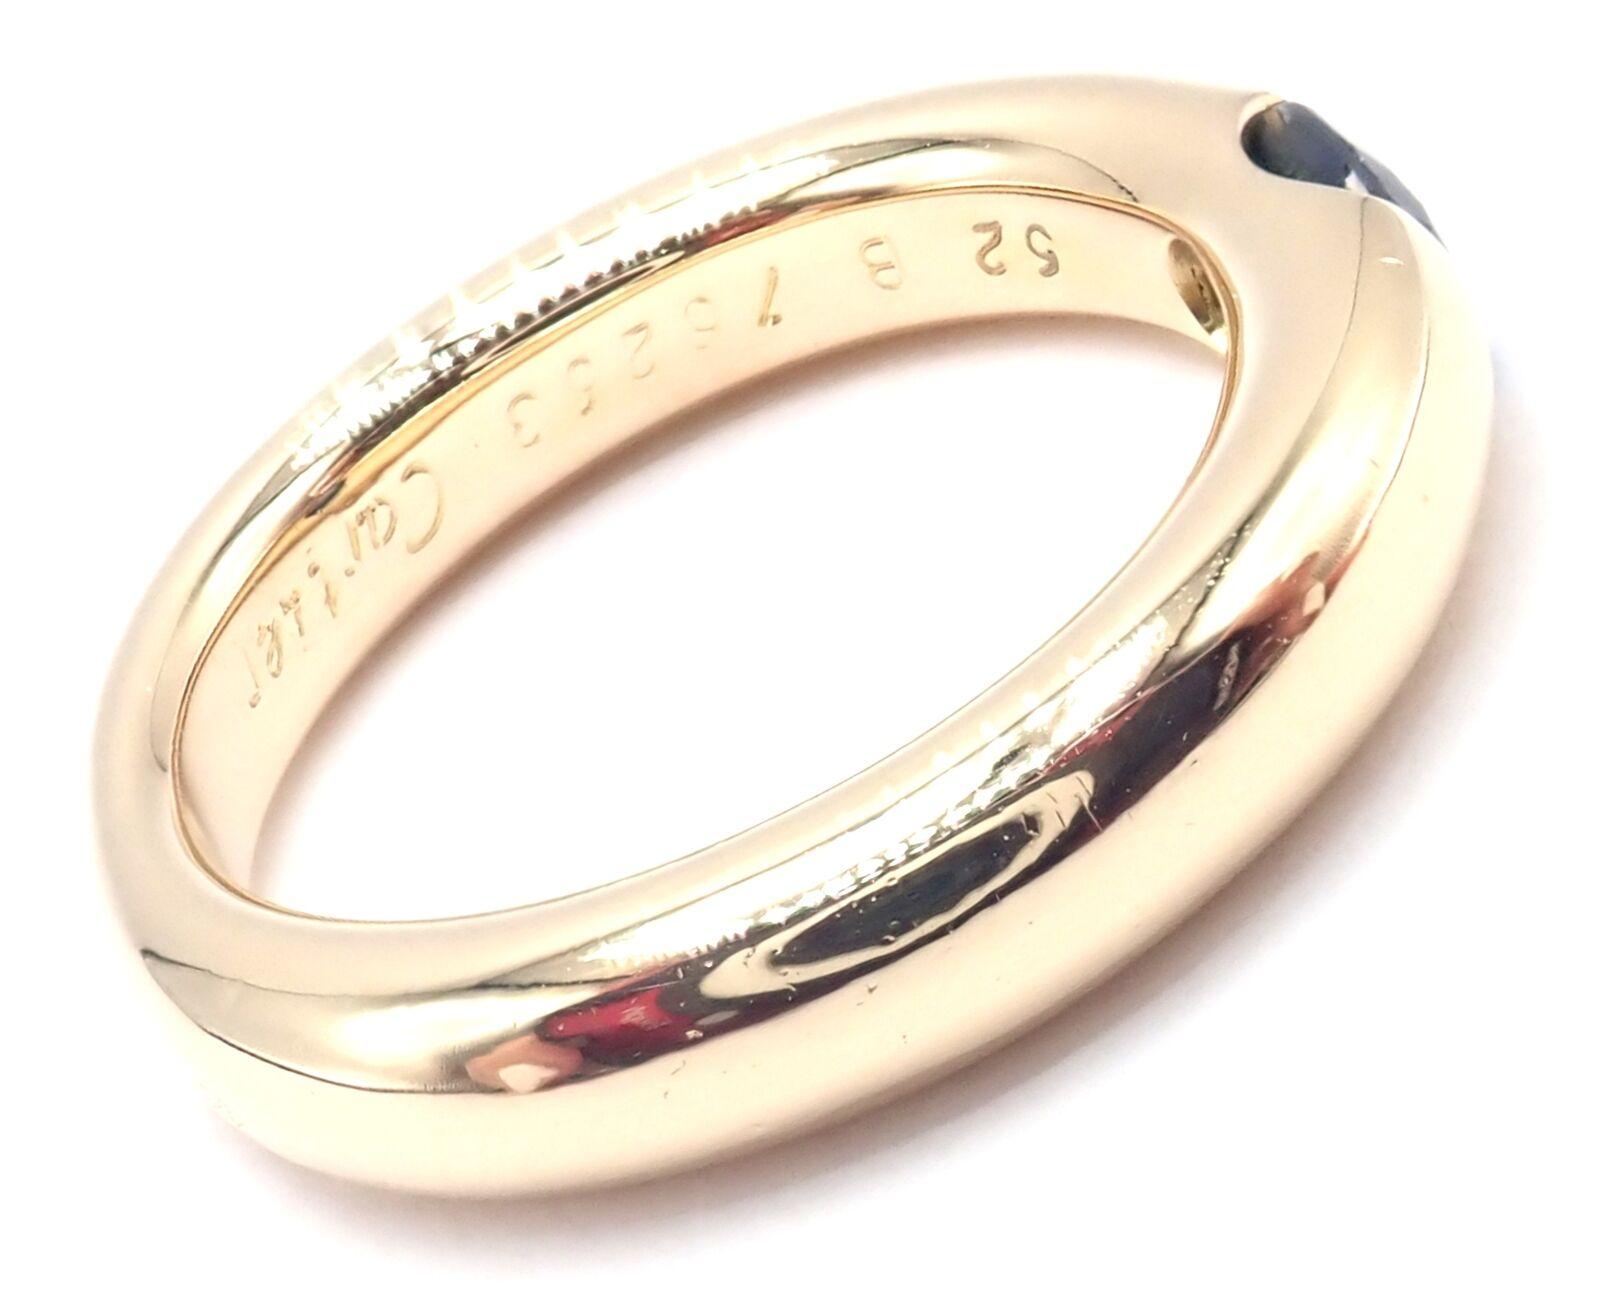 18k Yellow Gold Ellipse Sapphire Band Ring by Cartier.
With 1 oval-shaped beautiful sapphire 5mm x 4mm.
Details:
Width: 4mm
Weight: 9.1 grams
Ring Size: European 52, US 6
Stamped Hallmarks: Cartier 750 52 1992 B 75XXX(serial number omitted)
*Free